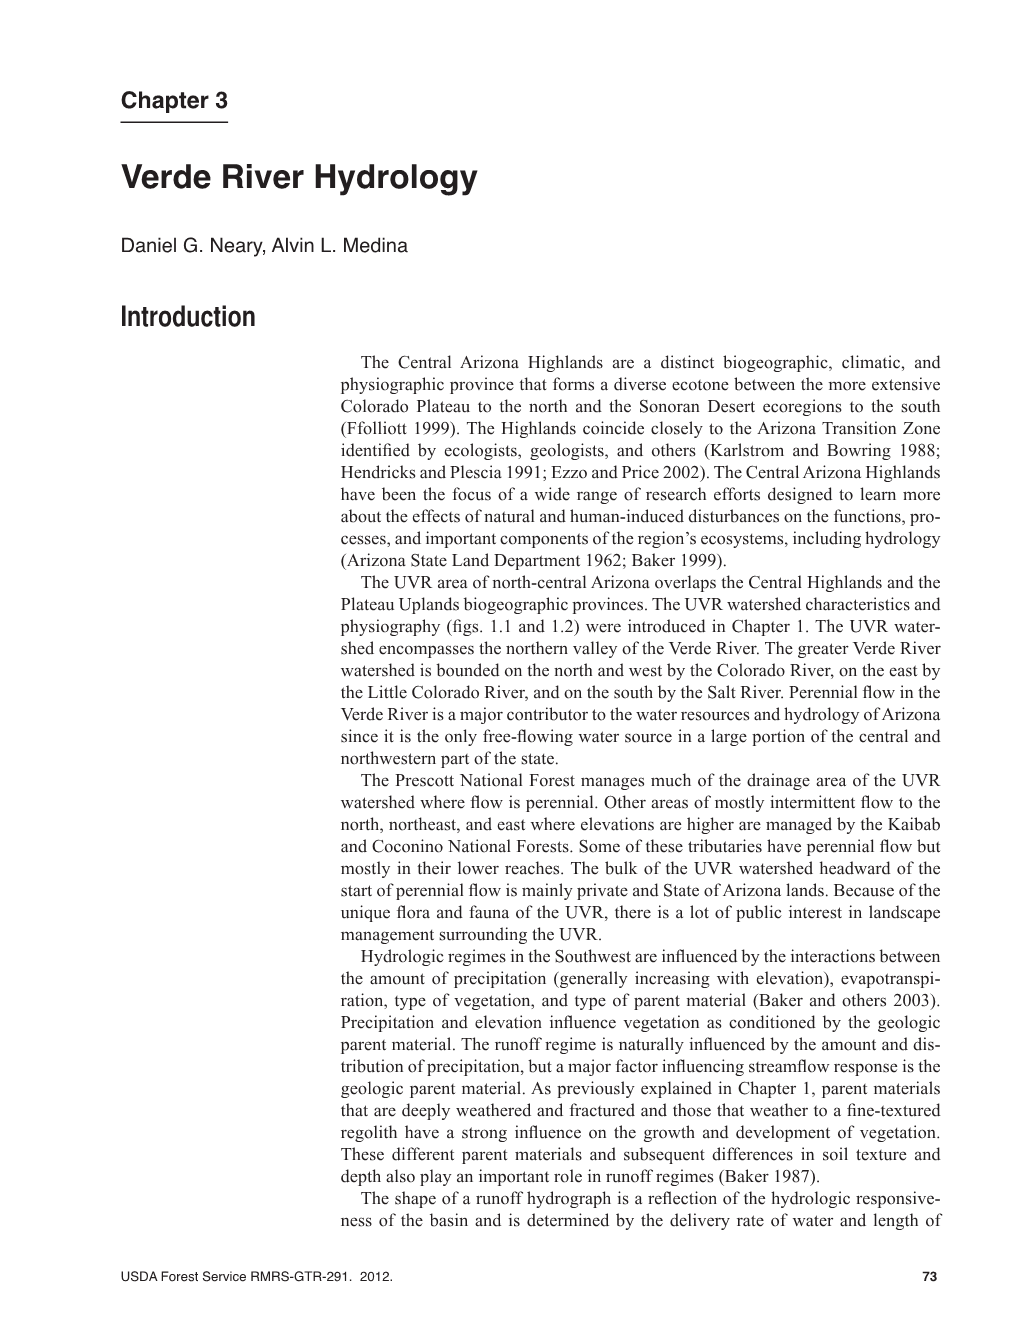 Synthesis of Upper Verde River Research and Monitoring 1993-2008